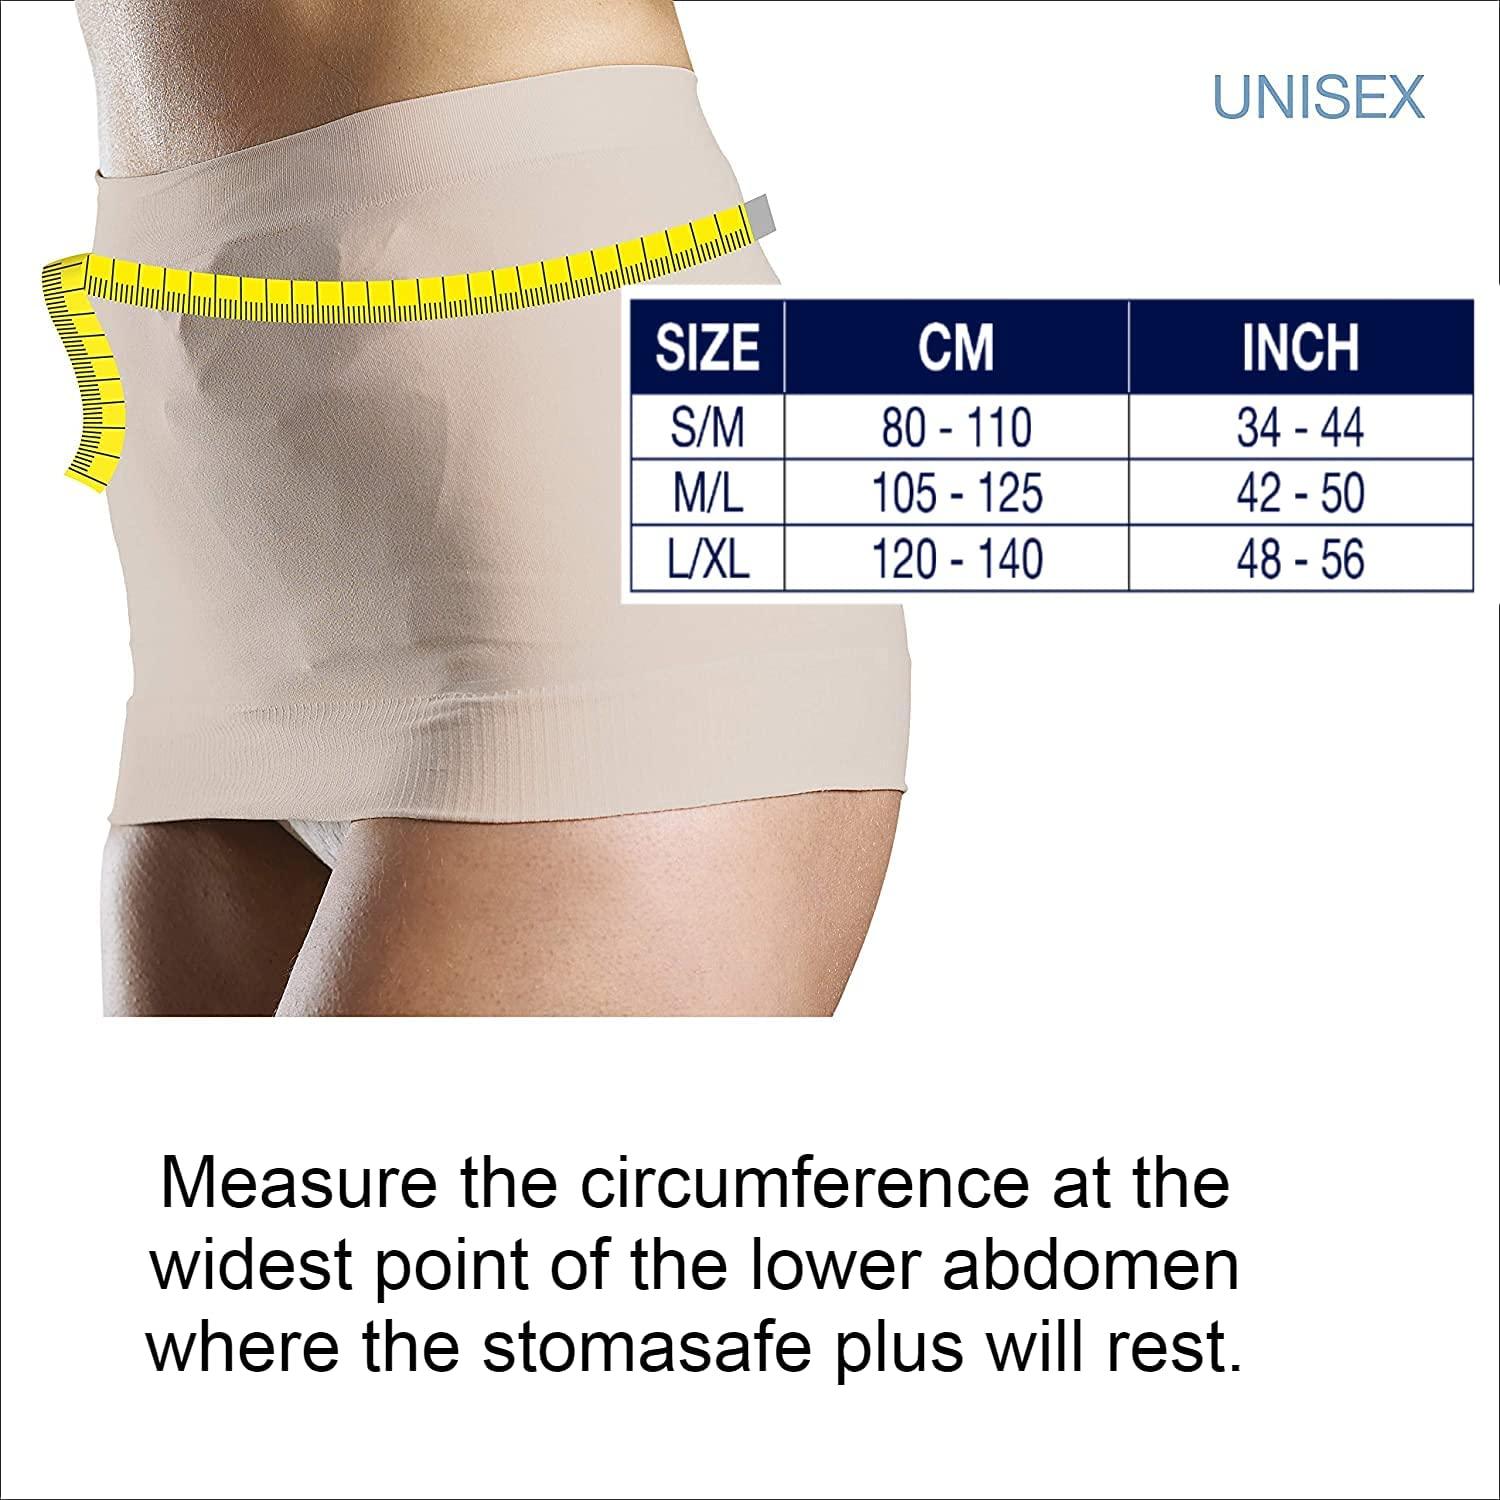 Corsinel StomaSafe Plus Ostomy/Hernia Support Garment Light 3216 by TYTEX  (Beige, S/M) 33.5 - 44 Hip Circumference Beige Small/Medium (Pack of 1)